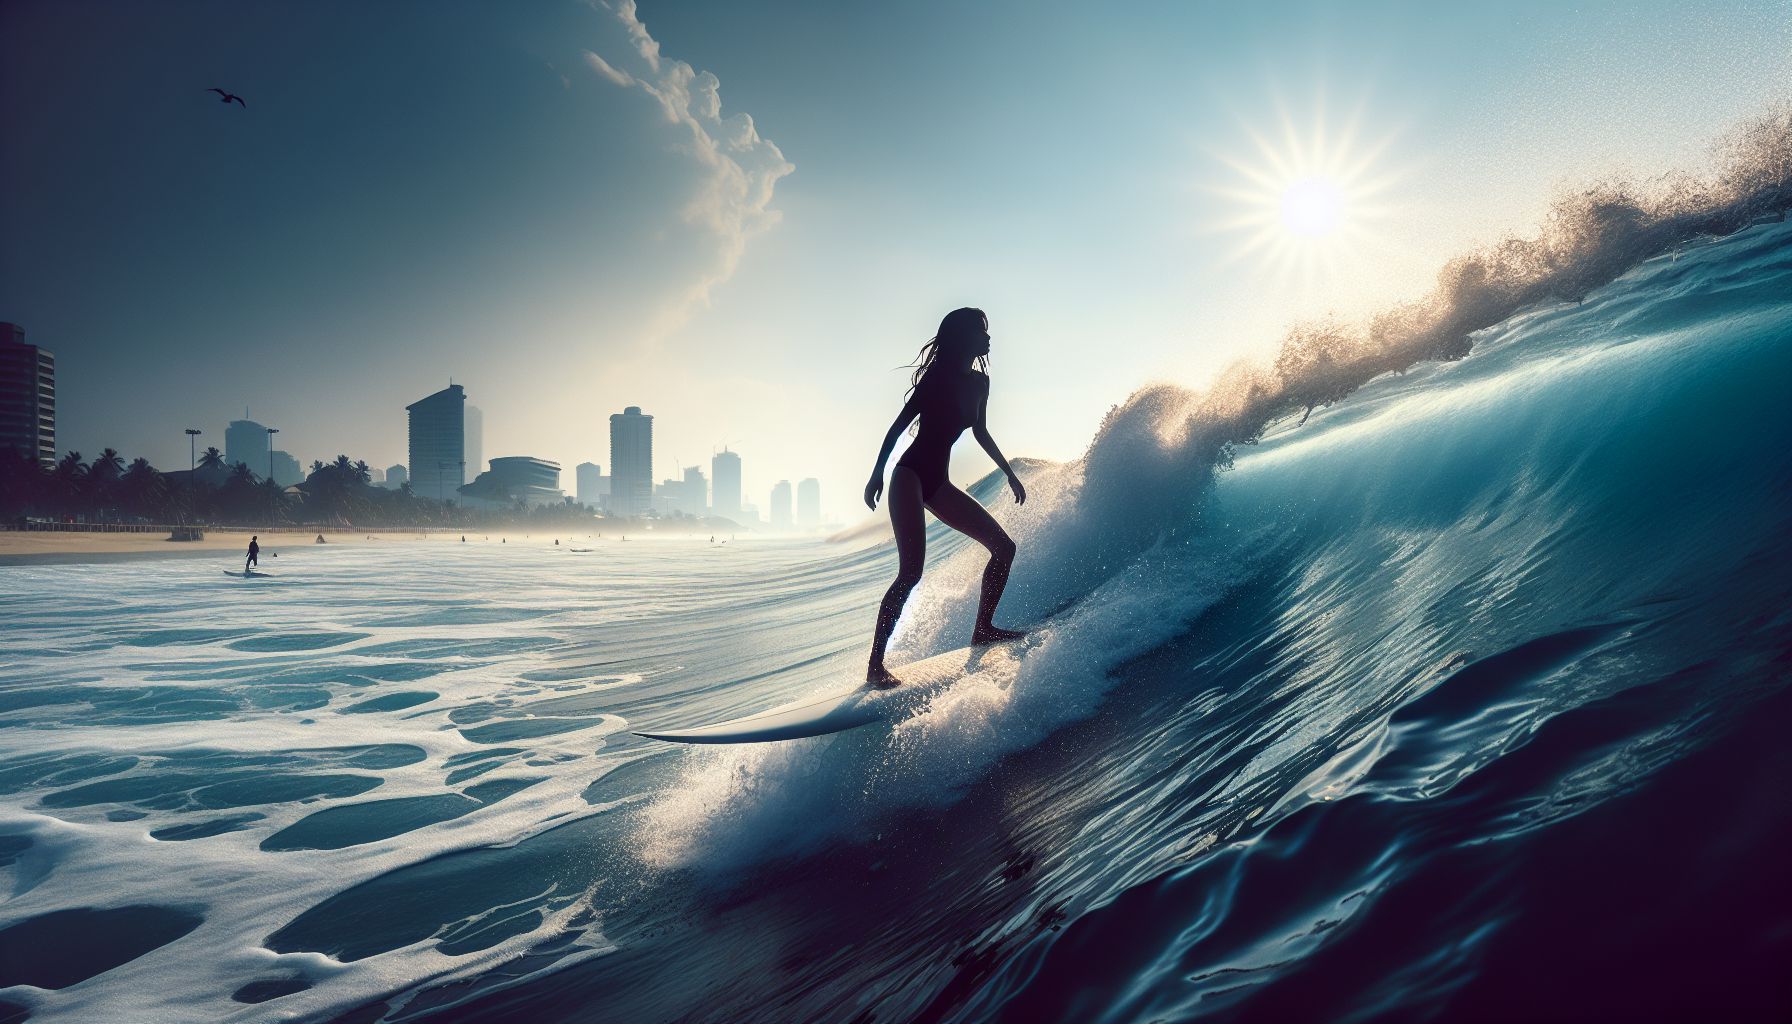 Breaking the Surface: The Thrill And Excitement of Surfing